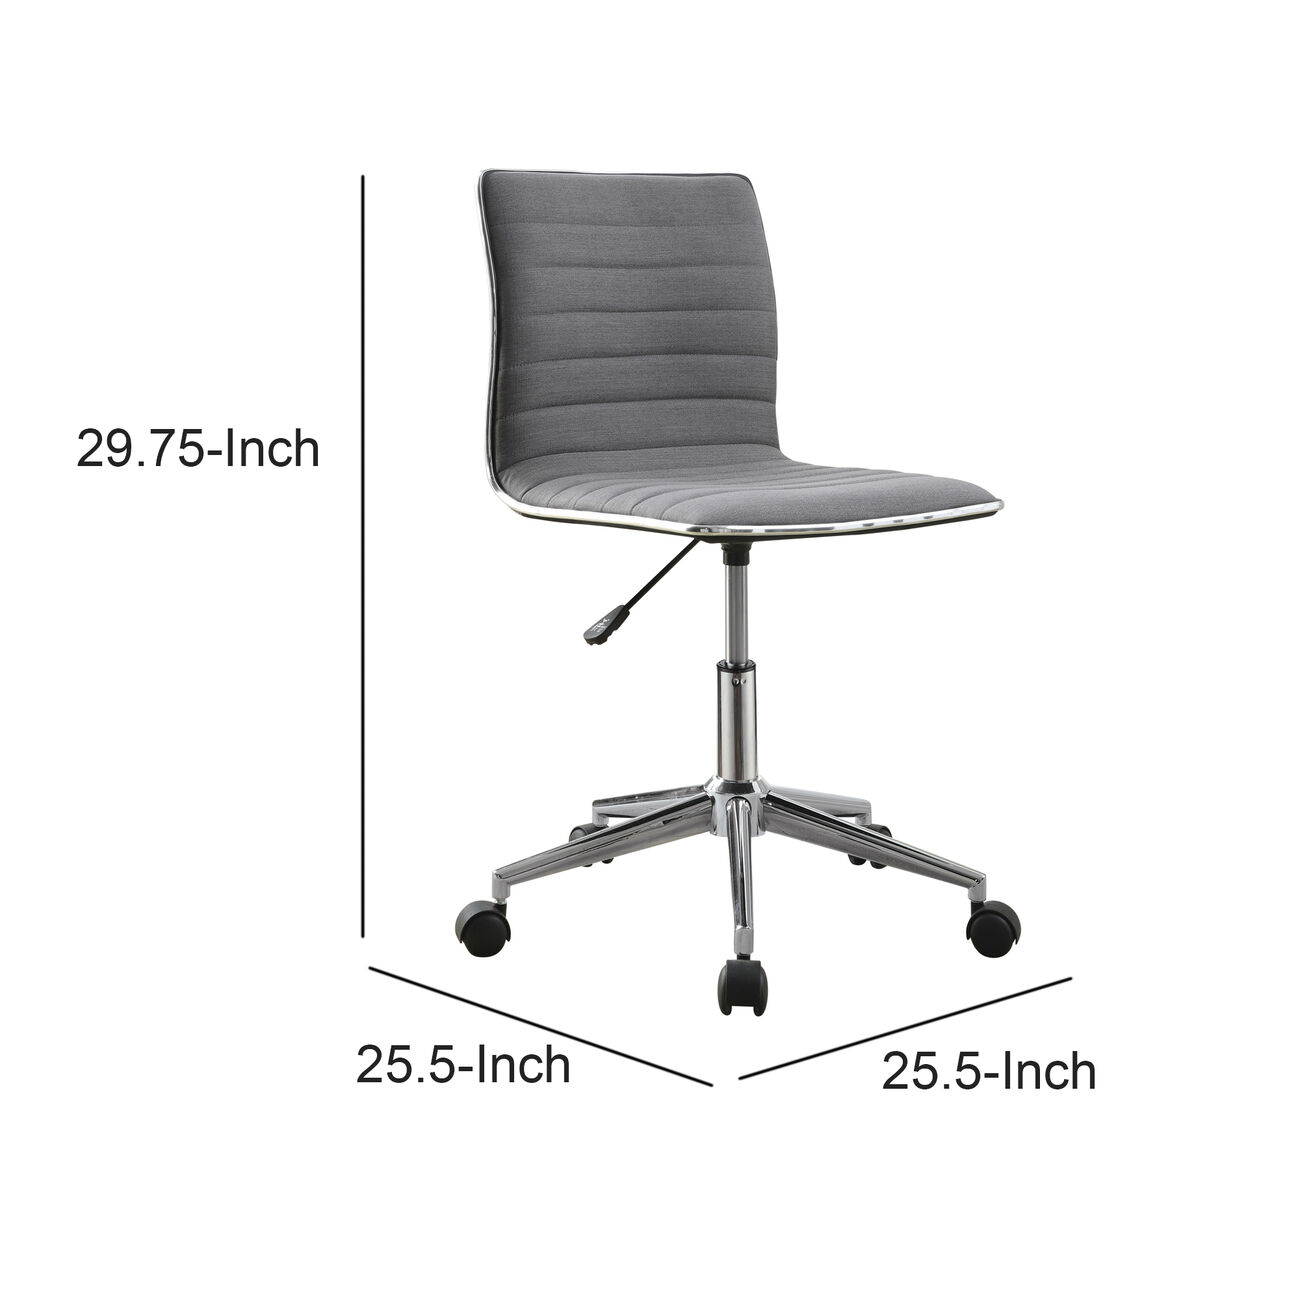 Contemporary Mid-Back Desk Chair, Gray